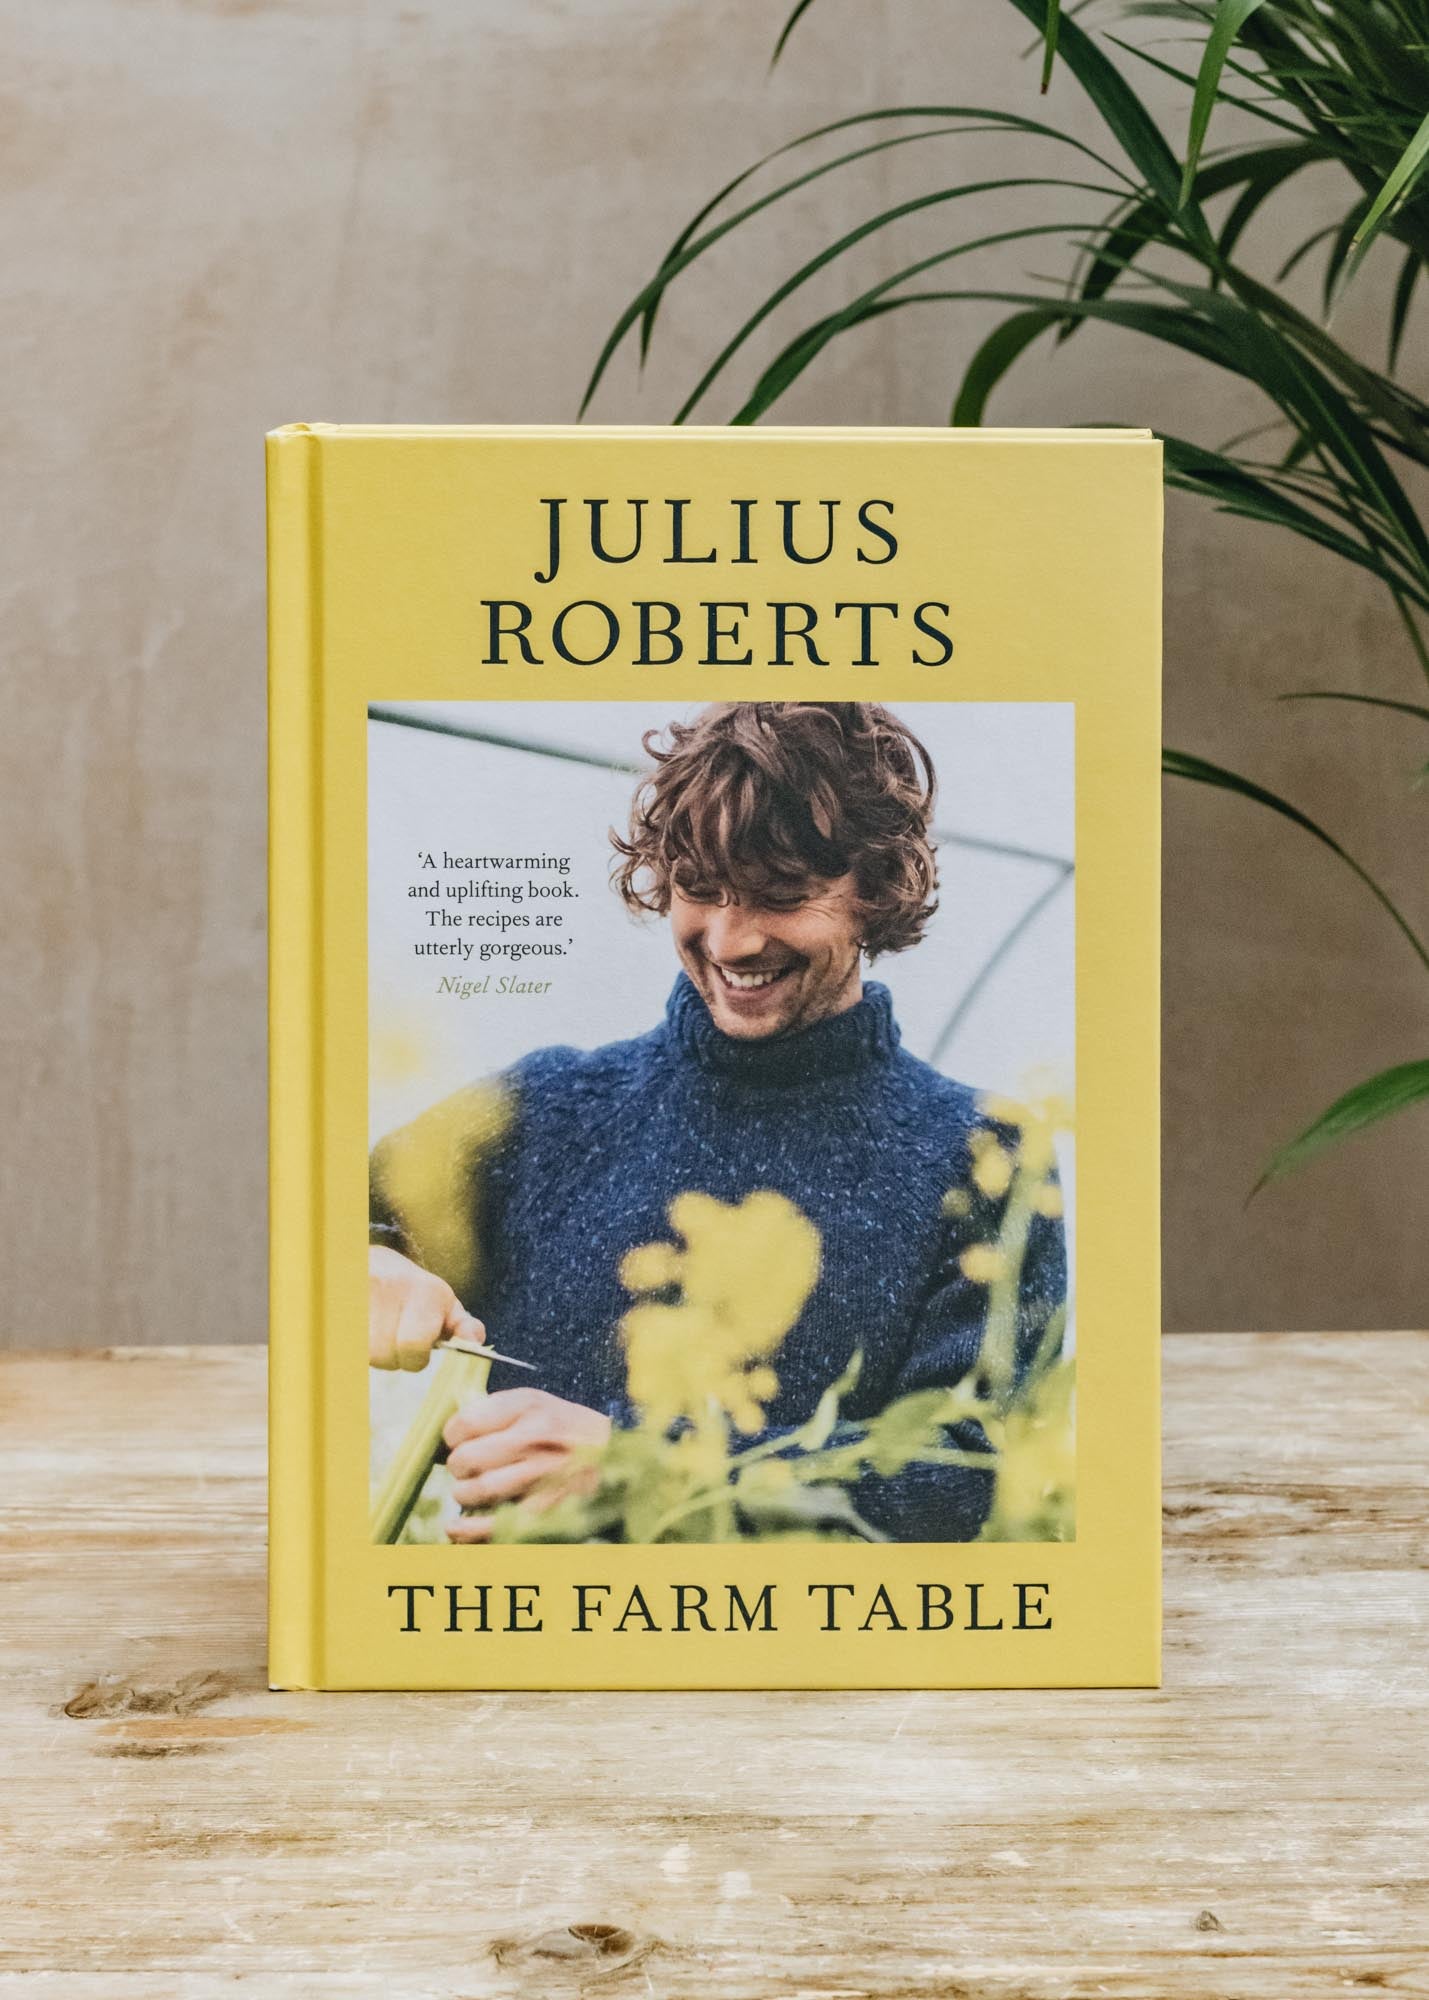 The Farm Table by Julius Roberts